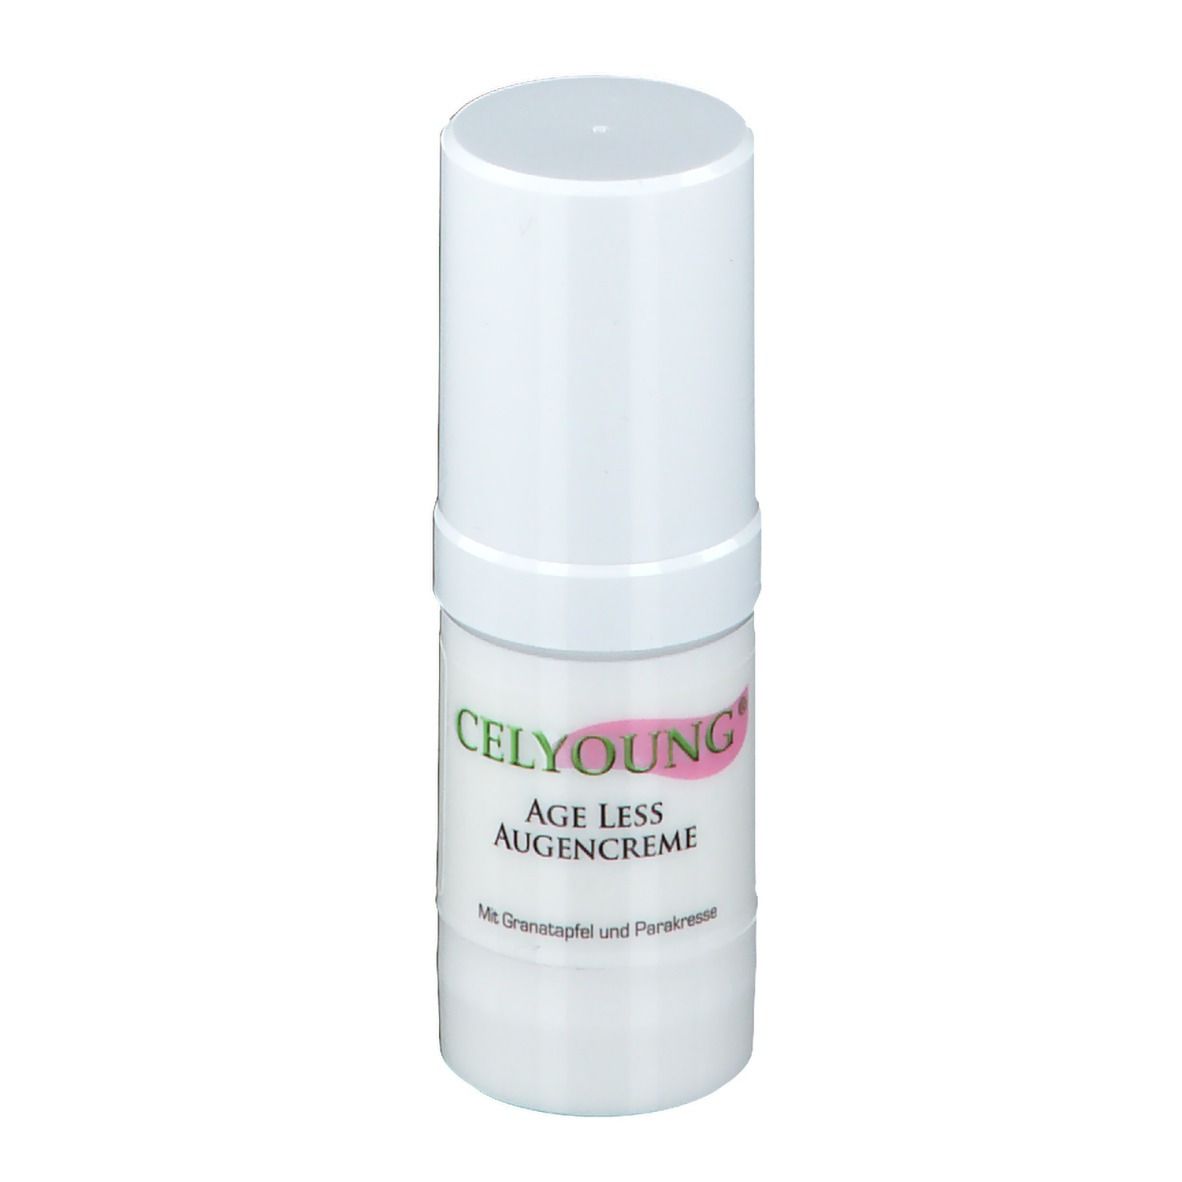 CELYOUNG® AGE LESS Augencreme